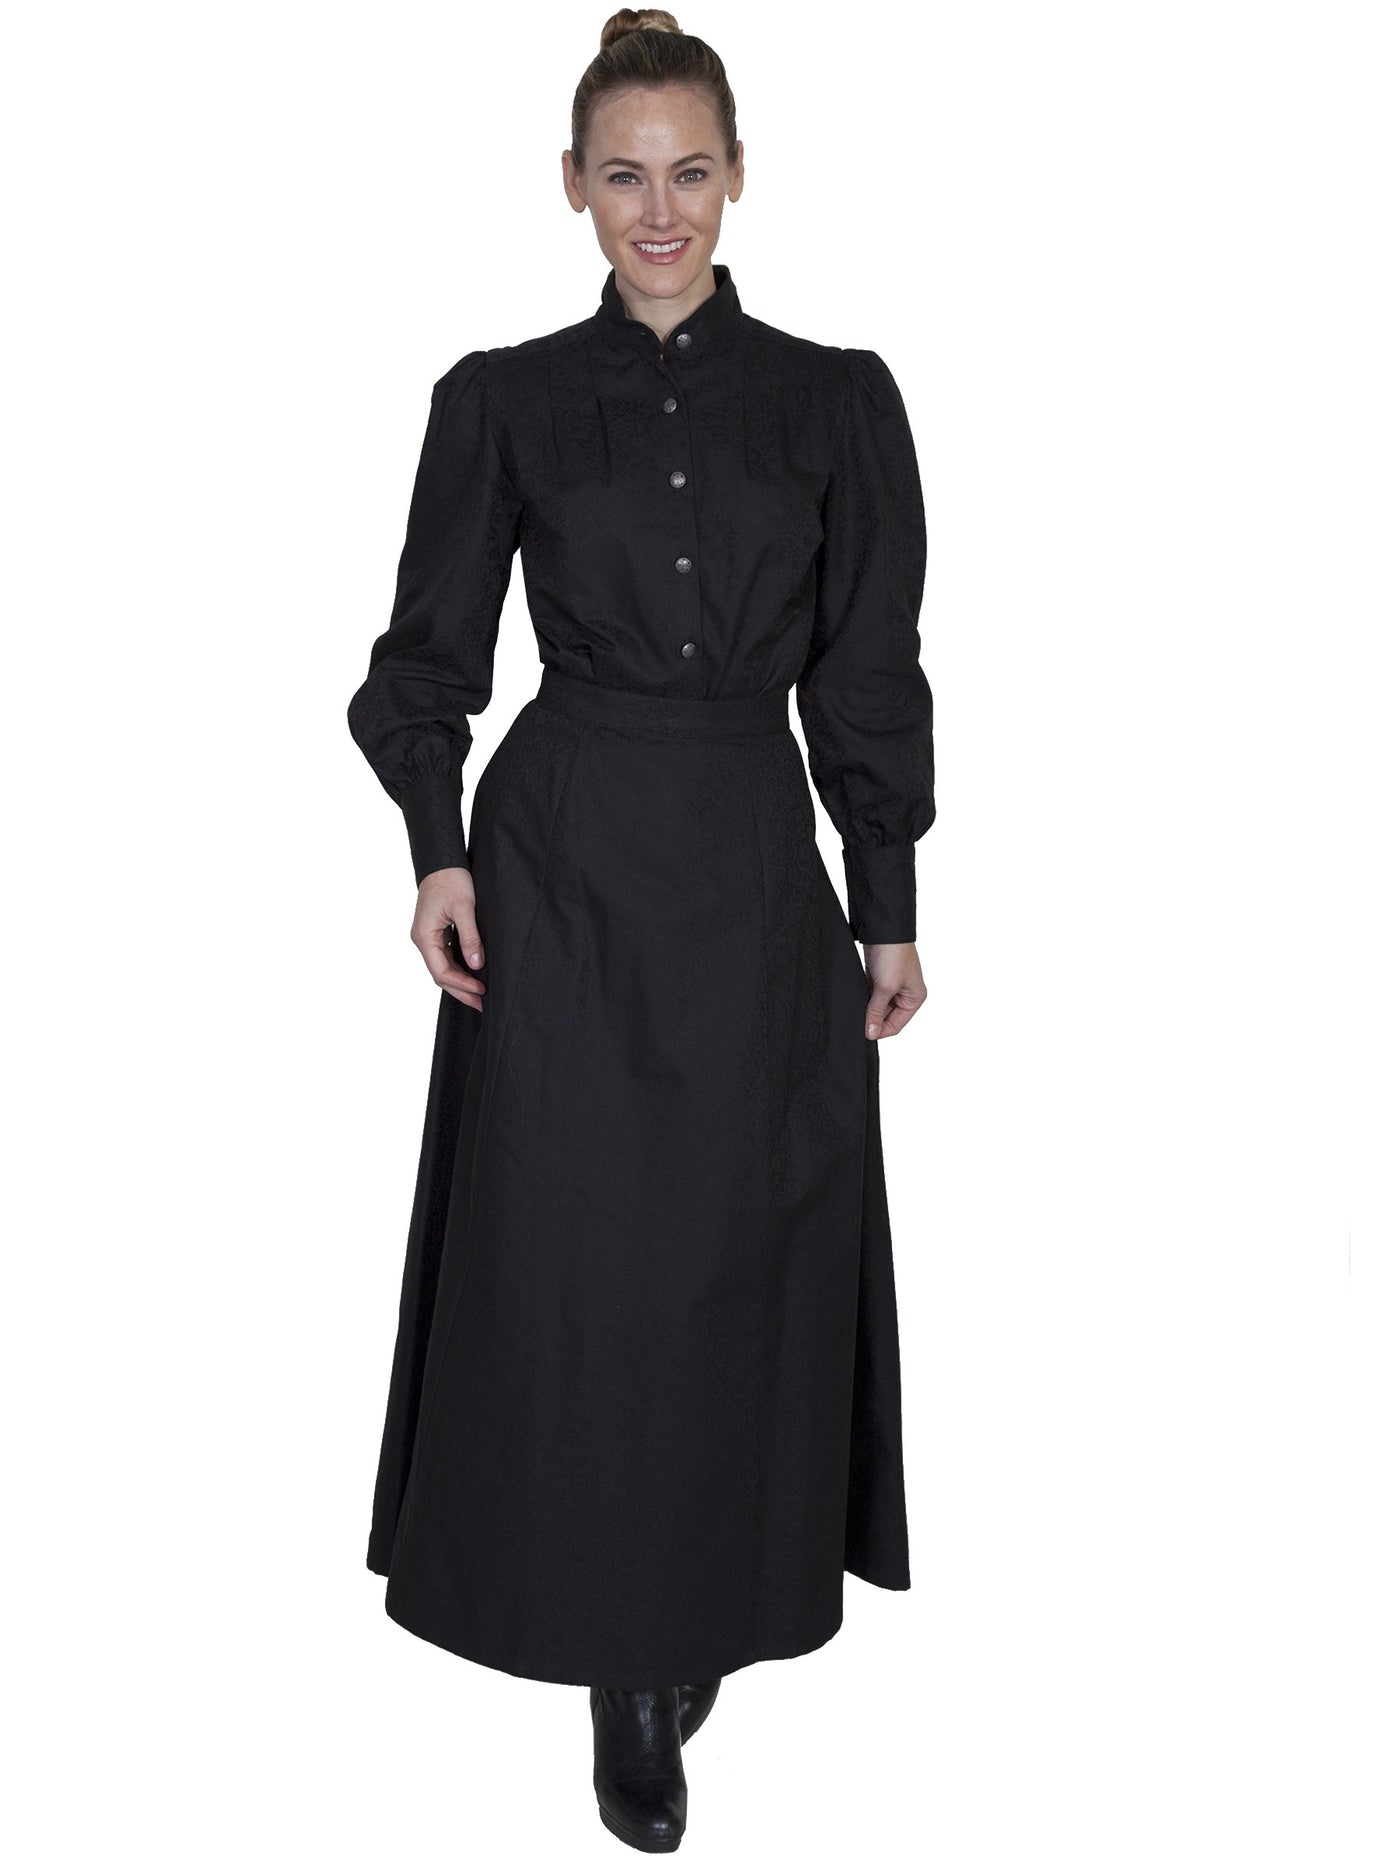 Classic Victorian Style Black Skirt - SOLD OUT